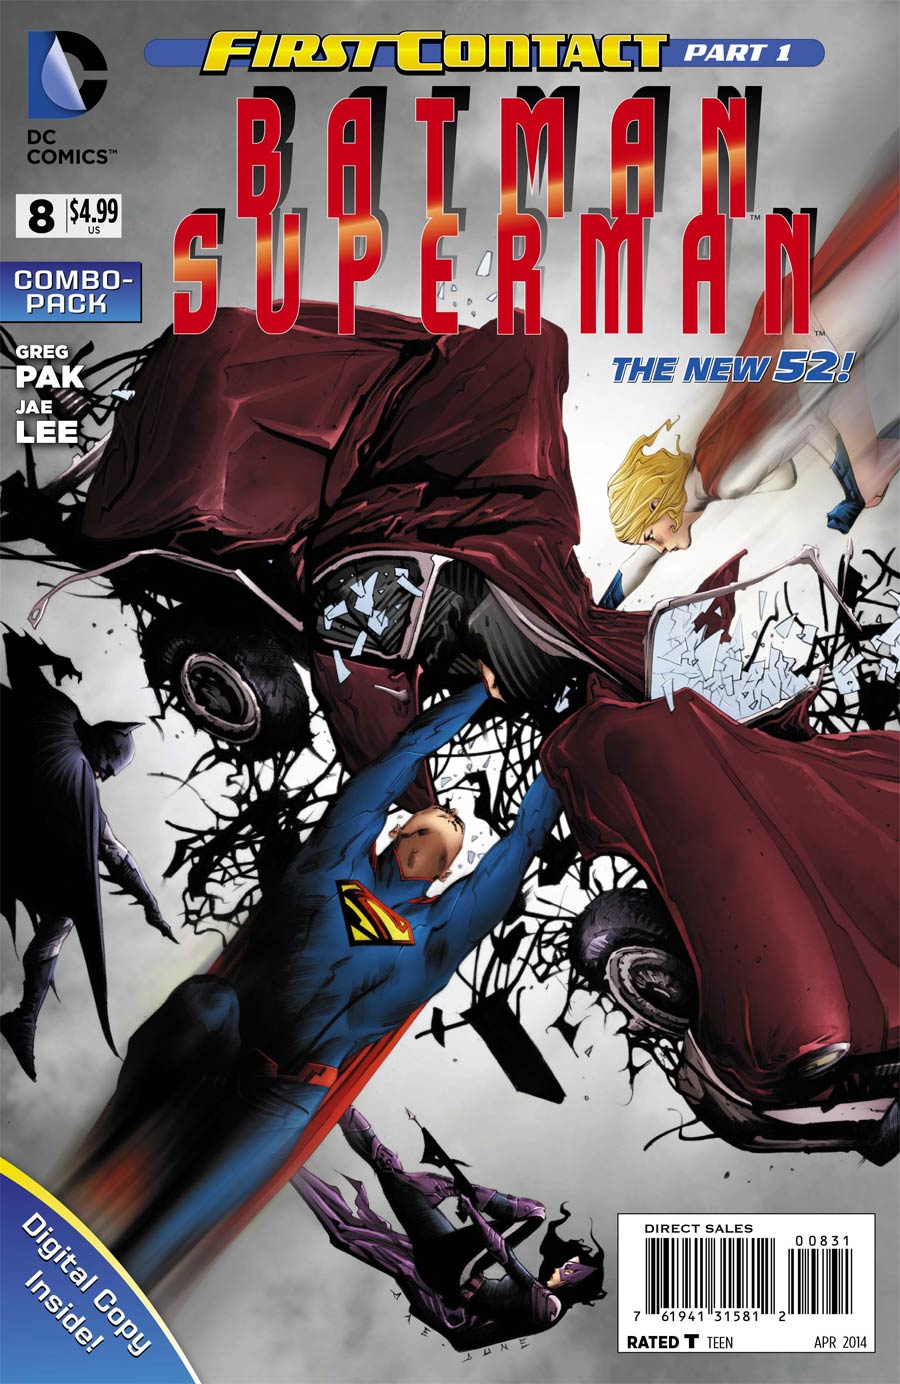 Batman Superman #8 Cover C Combo Pack Without Polybag (First Contact Part 1)